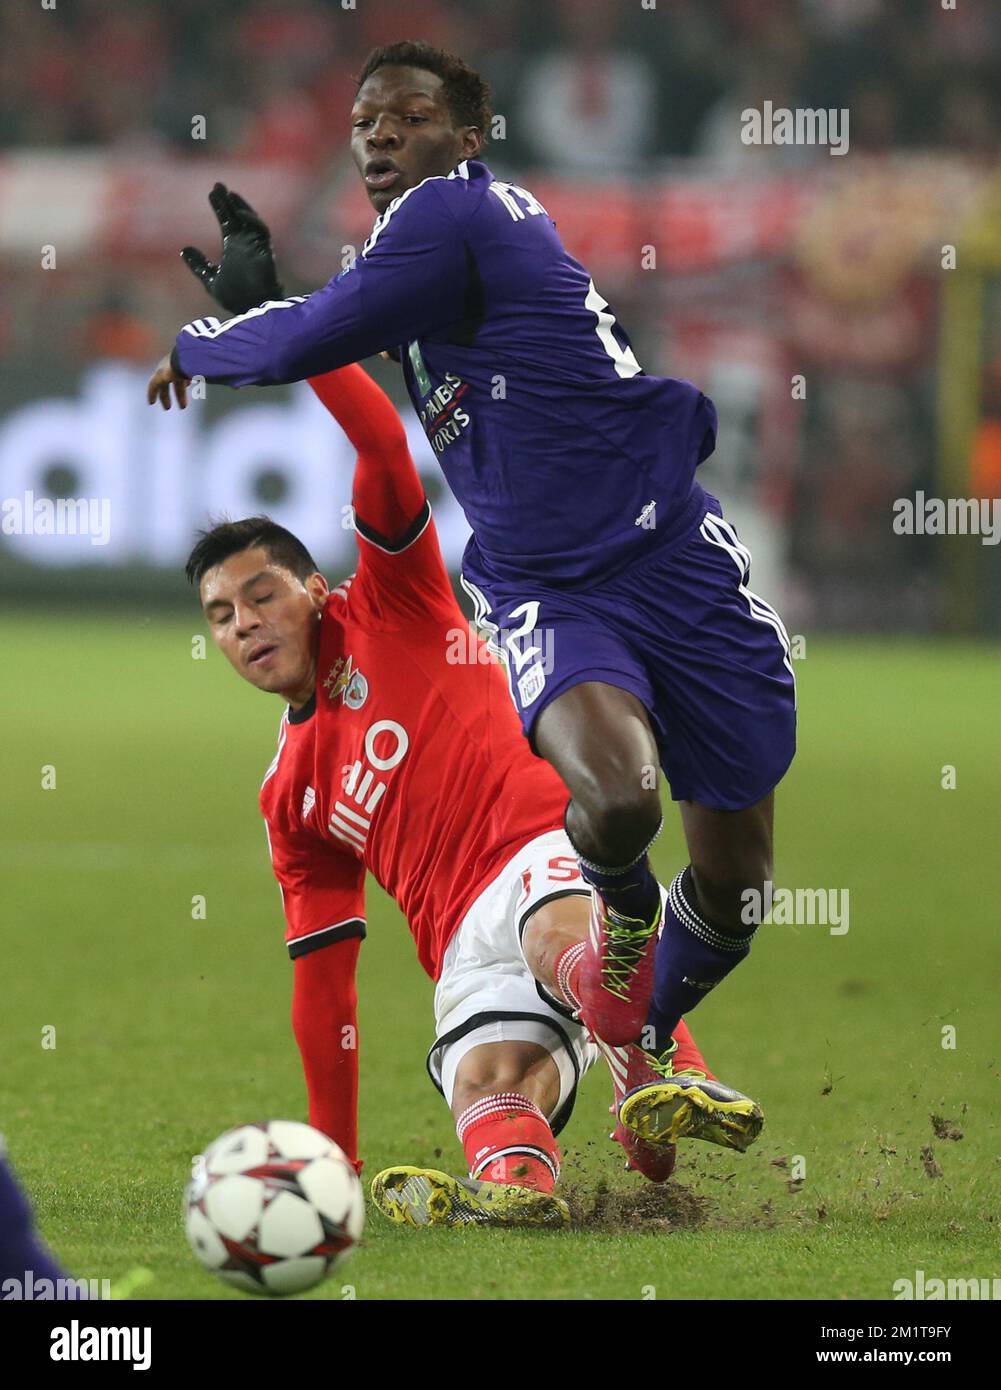 20131127 - BRUSSELS, BELGIUM: Benfica's Enzo Perez and Anderlecht's Fabrice N'Sakala fight for the ball during the soccer game between Belgian team RSC Anderlecht and Portuguese club S.L. Benfica, the fifth match of the Champions League Group stage; in the group C, Wednesday 27 November 2013 in Brussels. BELGA PHOTO VIRGINIE LEFOUR Stock Photo